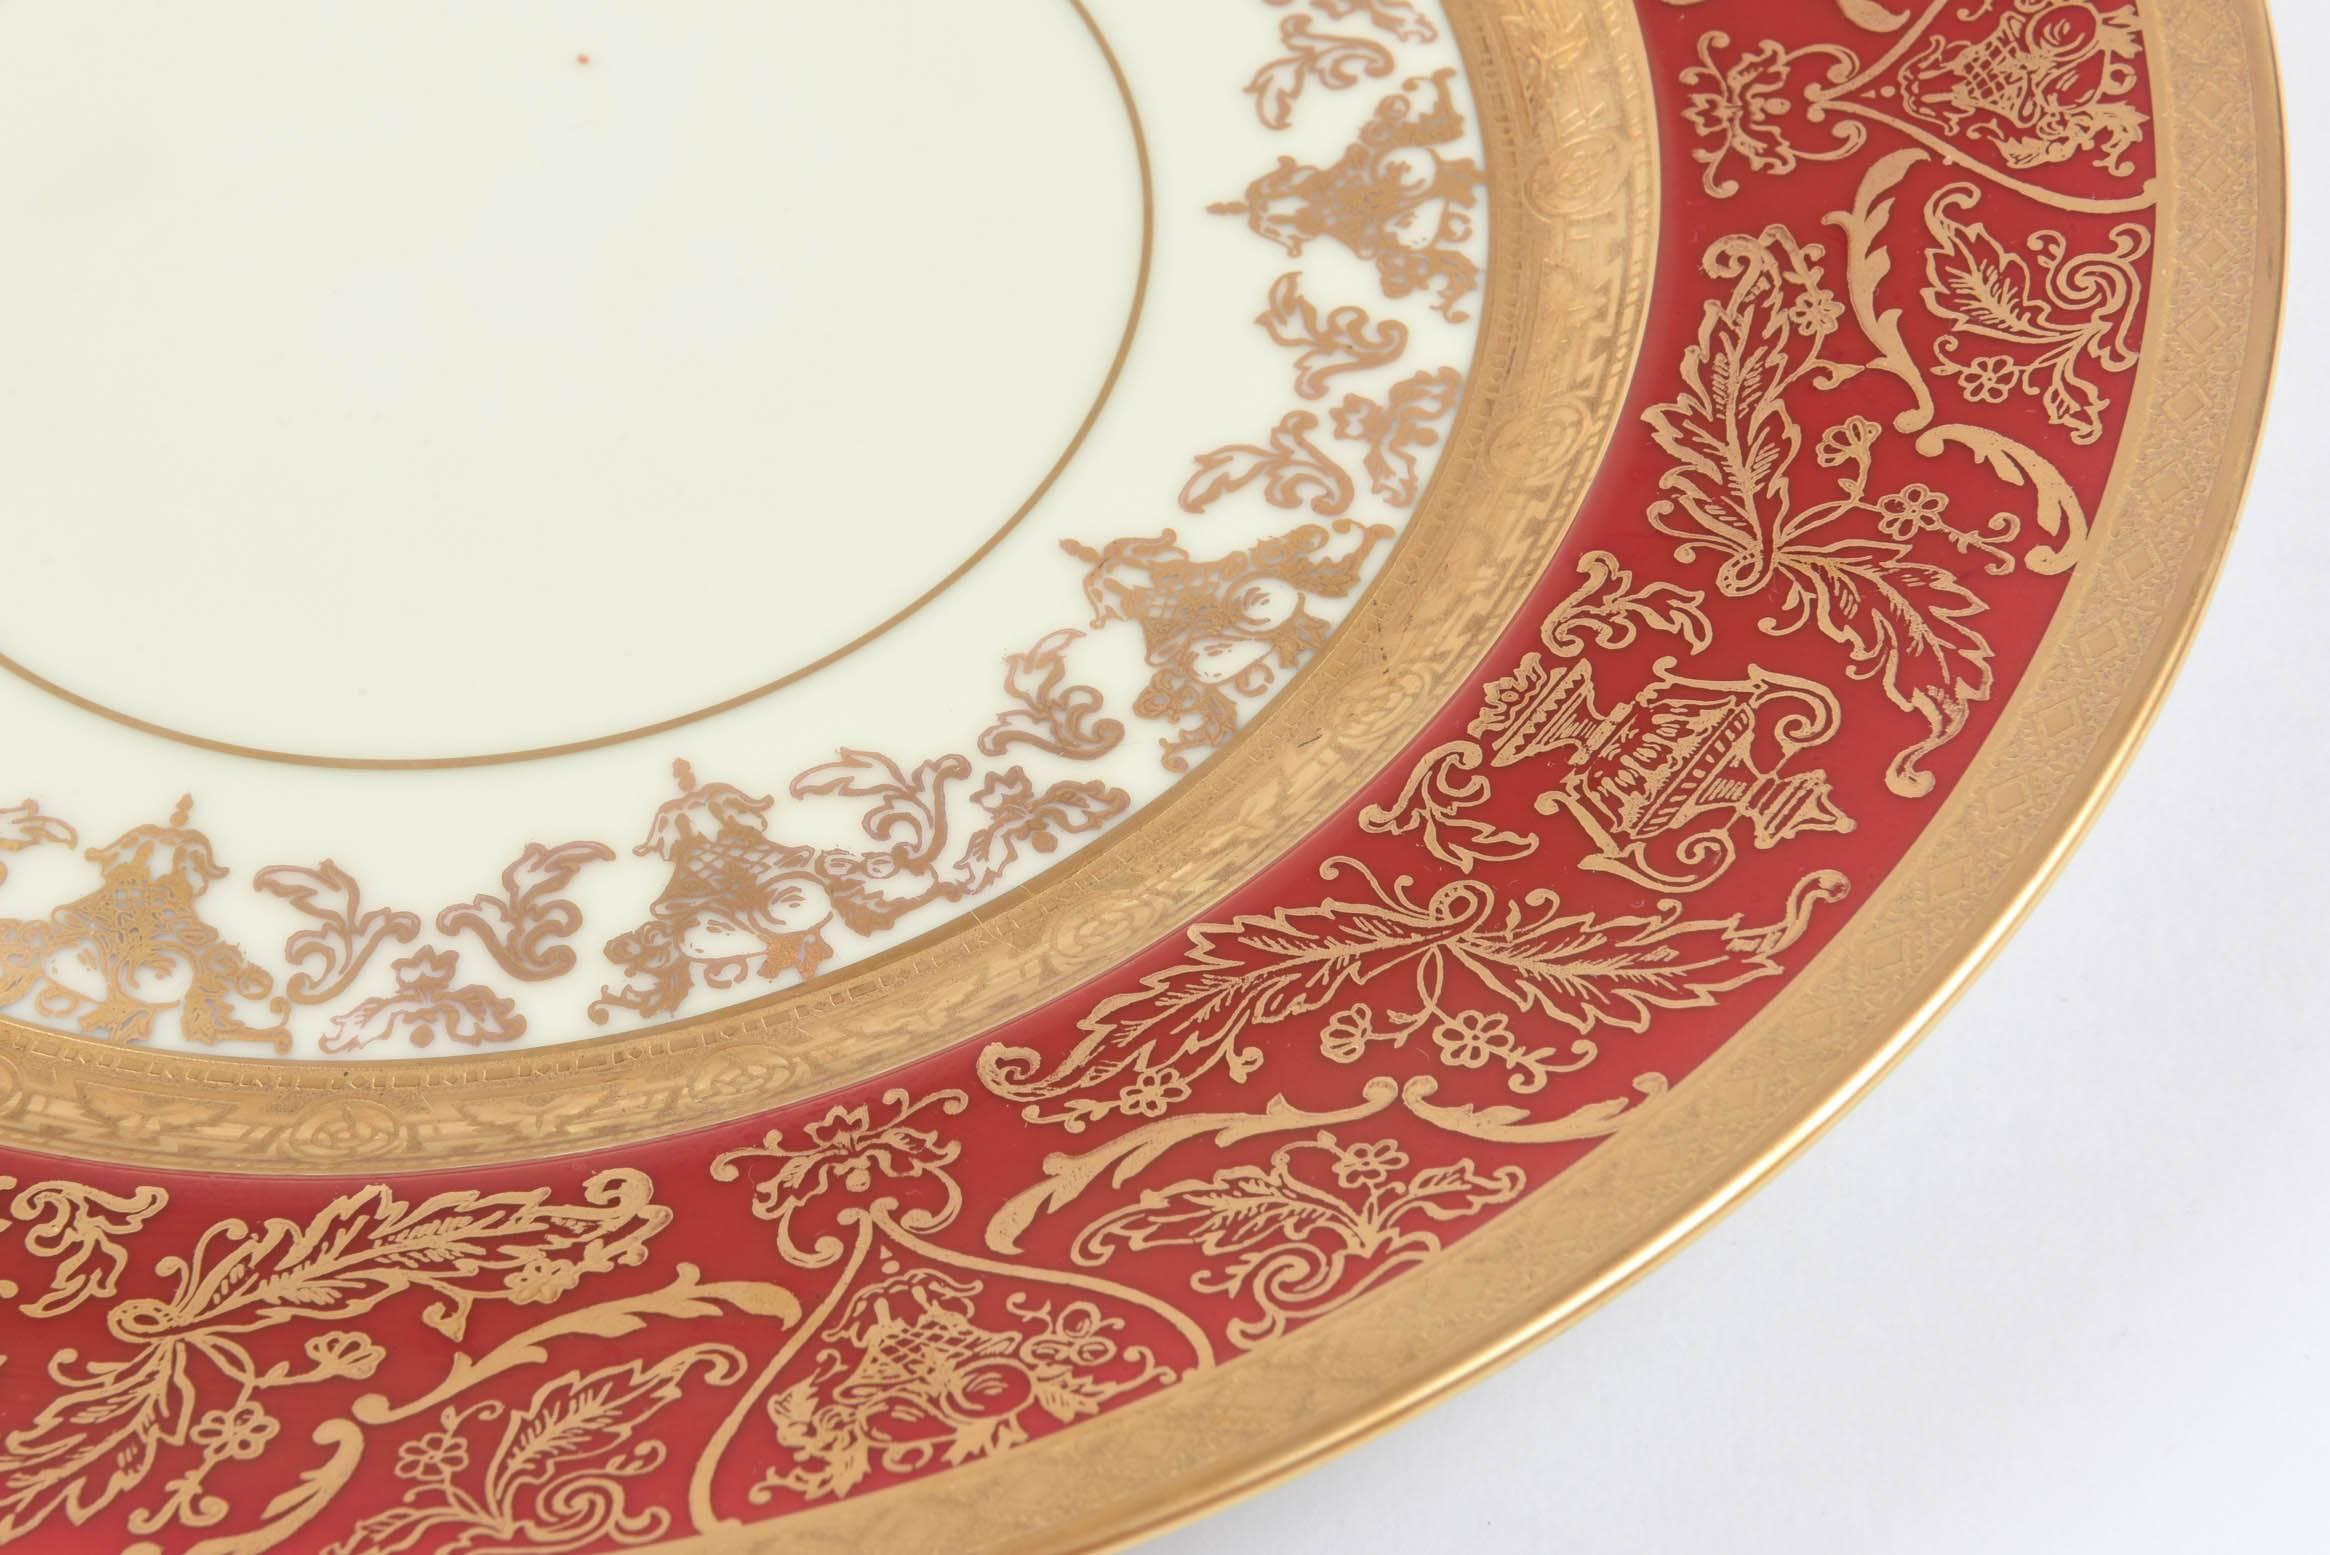 Hand-Crafted 12 Impressive Ruby Red & Gold Encrusted Dinner or Presentation Plates, Antique